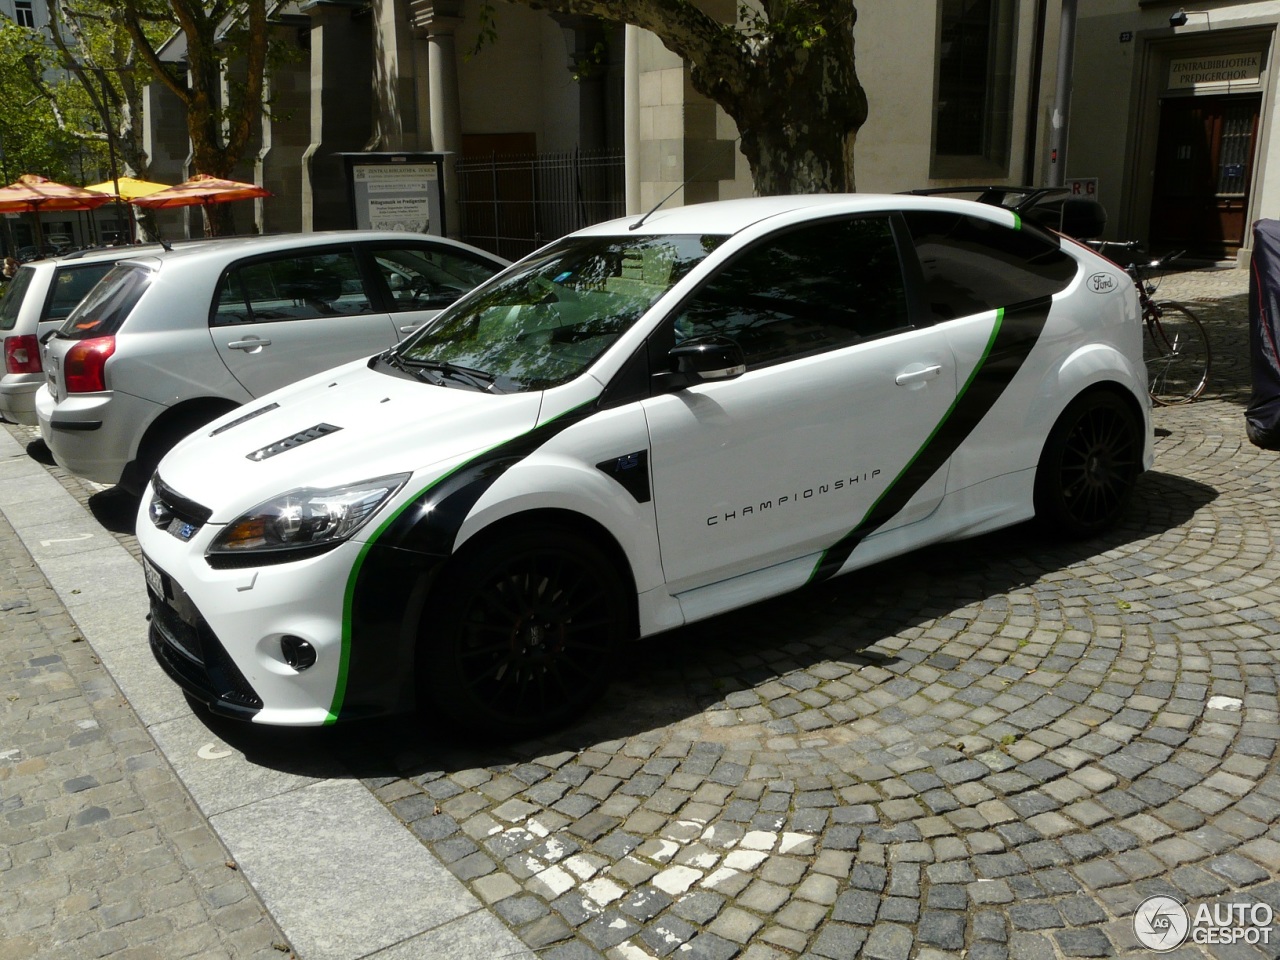 Ford Focus RS 2009 WRC Edition